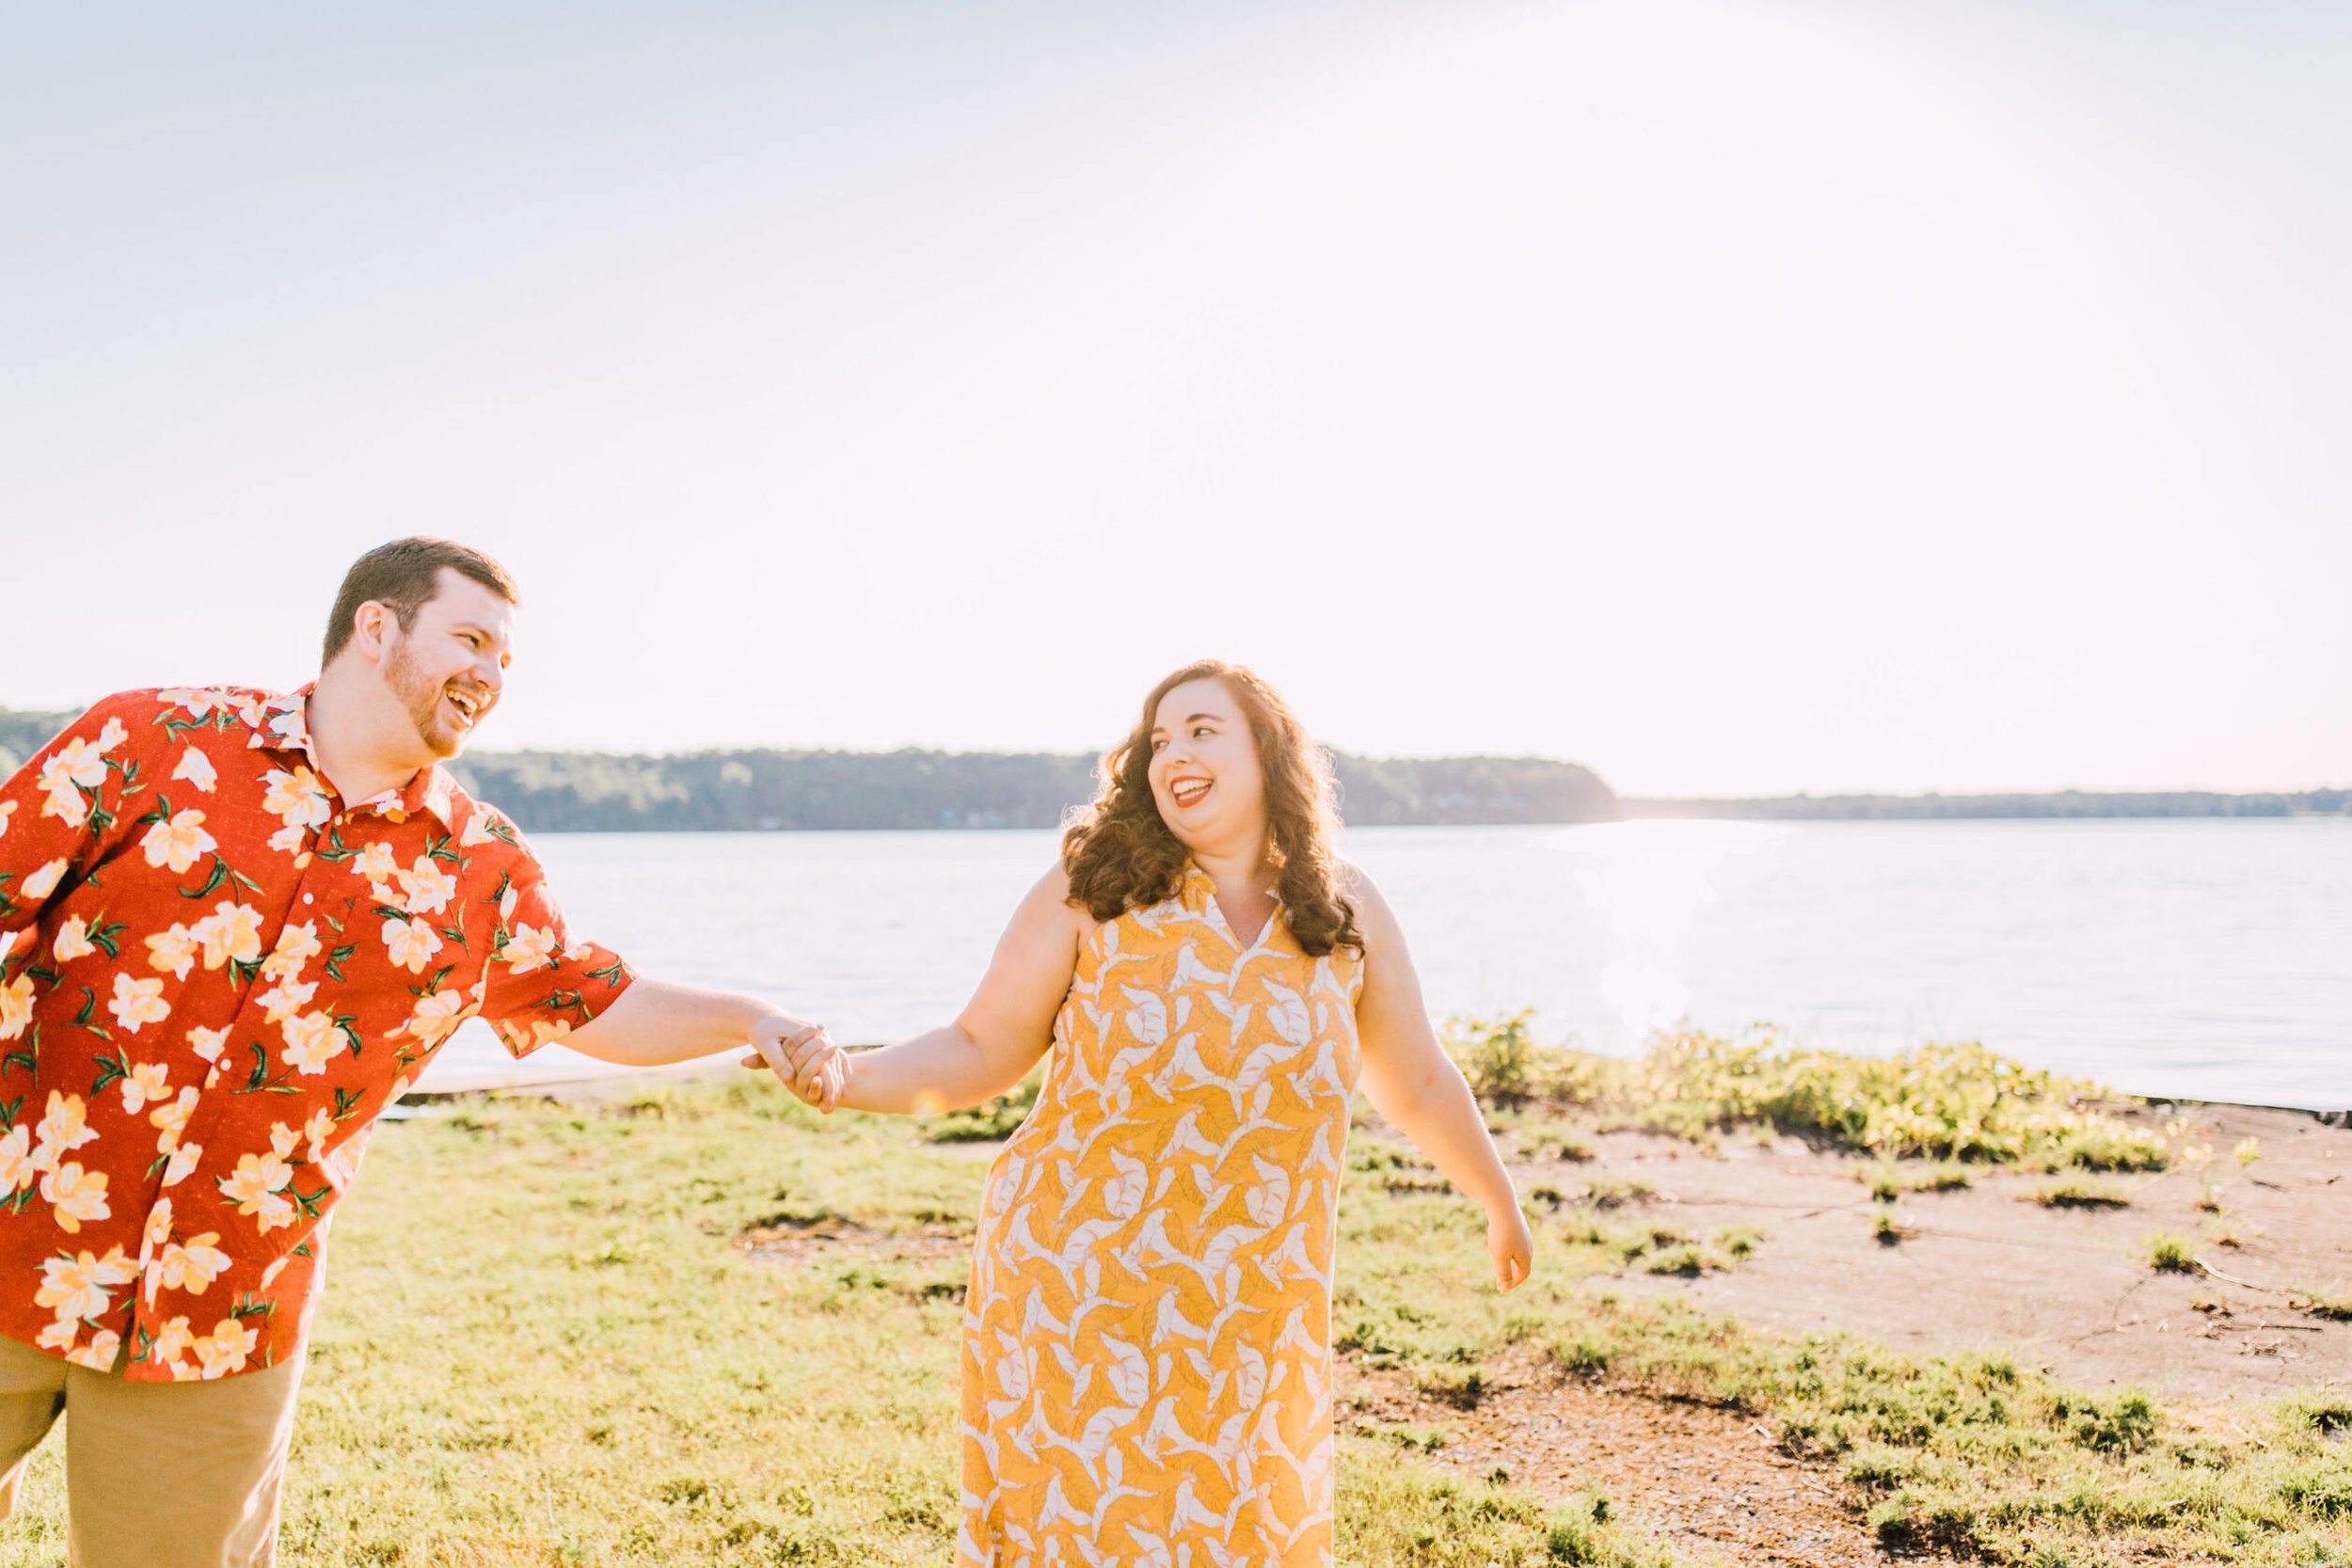  Hanna and Brandon’s sunset engagement photos show off their personality perfectly. Here, they hold hands while laughing together in a grassy area in front of Lake Ontario 